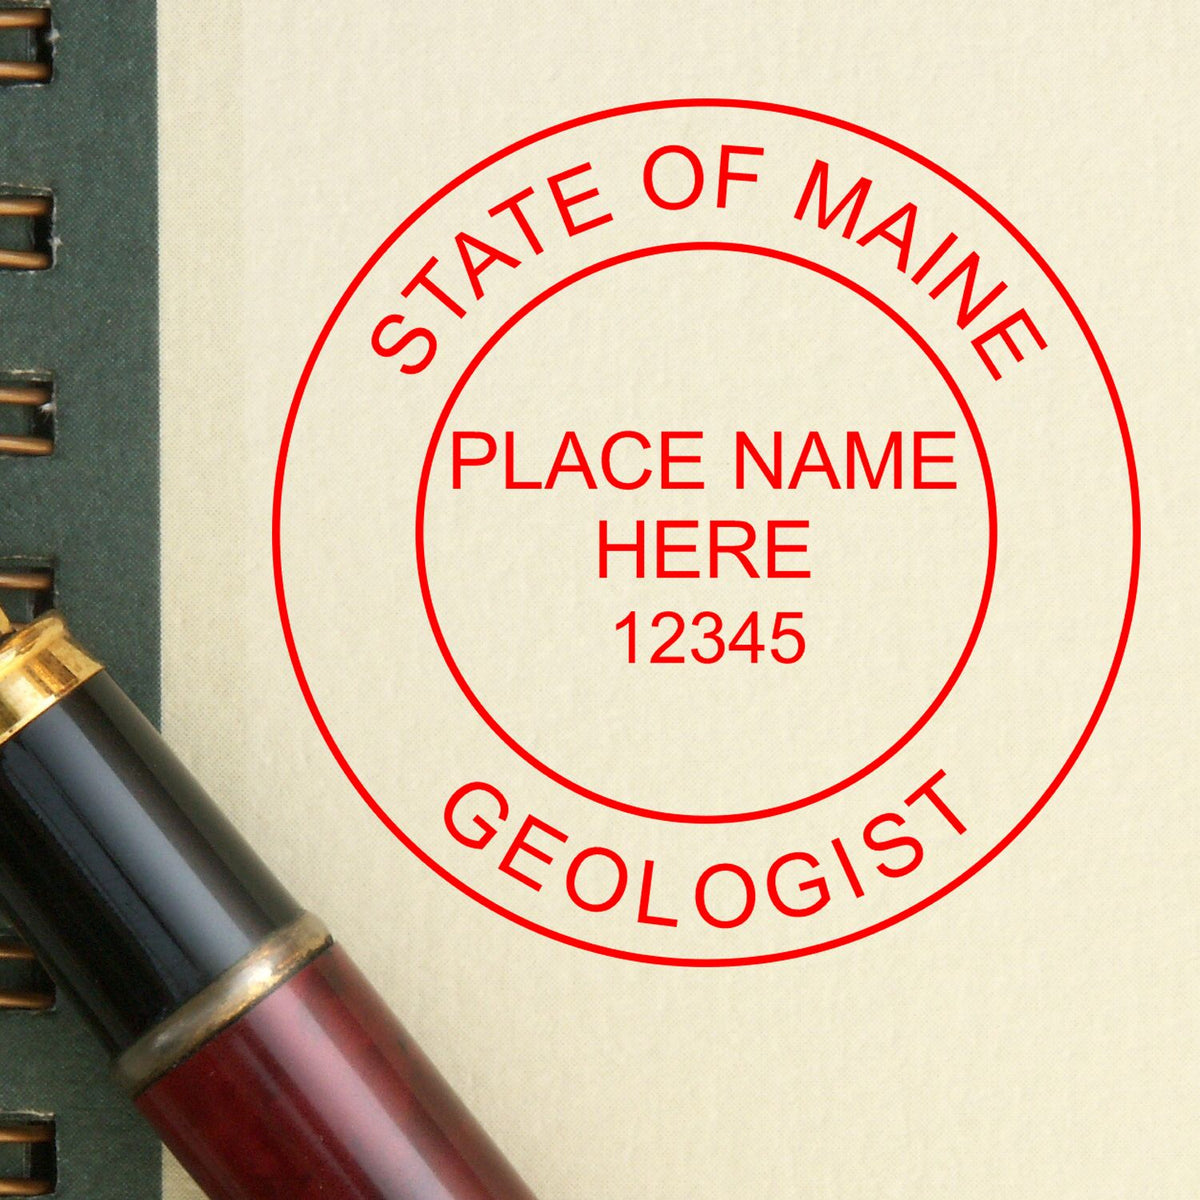 A lifestyle photo showing a stamped image of the Maine Professional Geologist Seal Stamp on a piece of paper